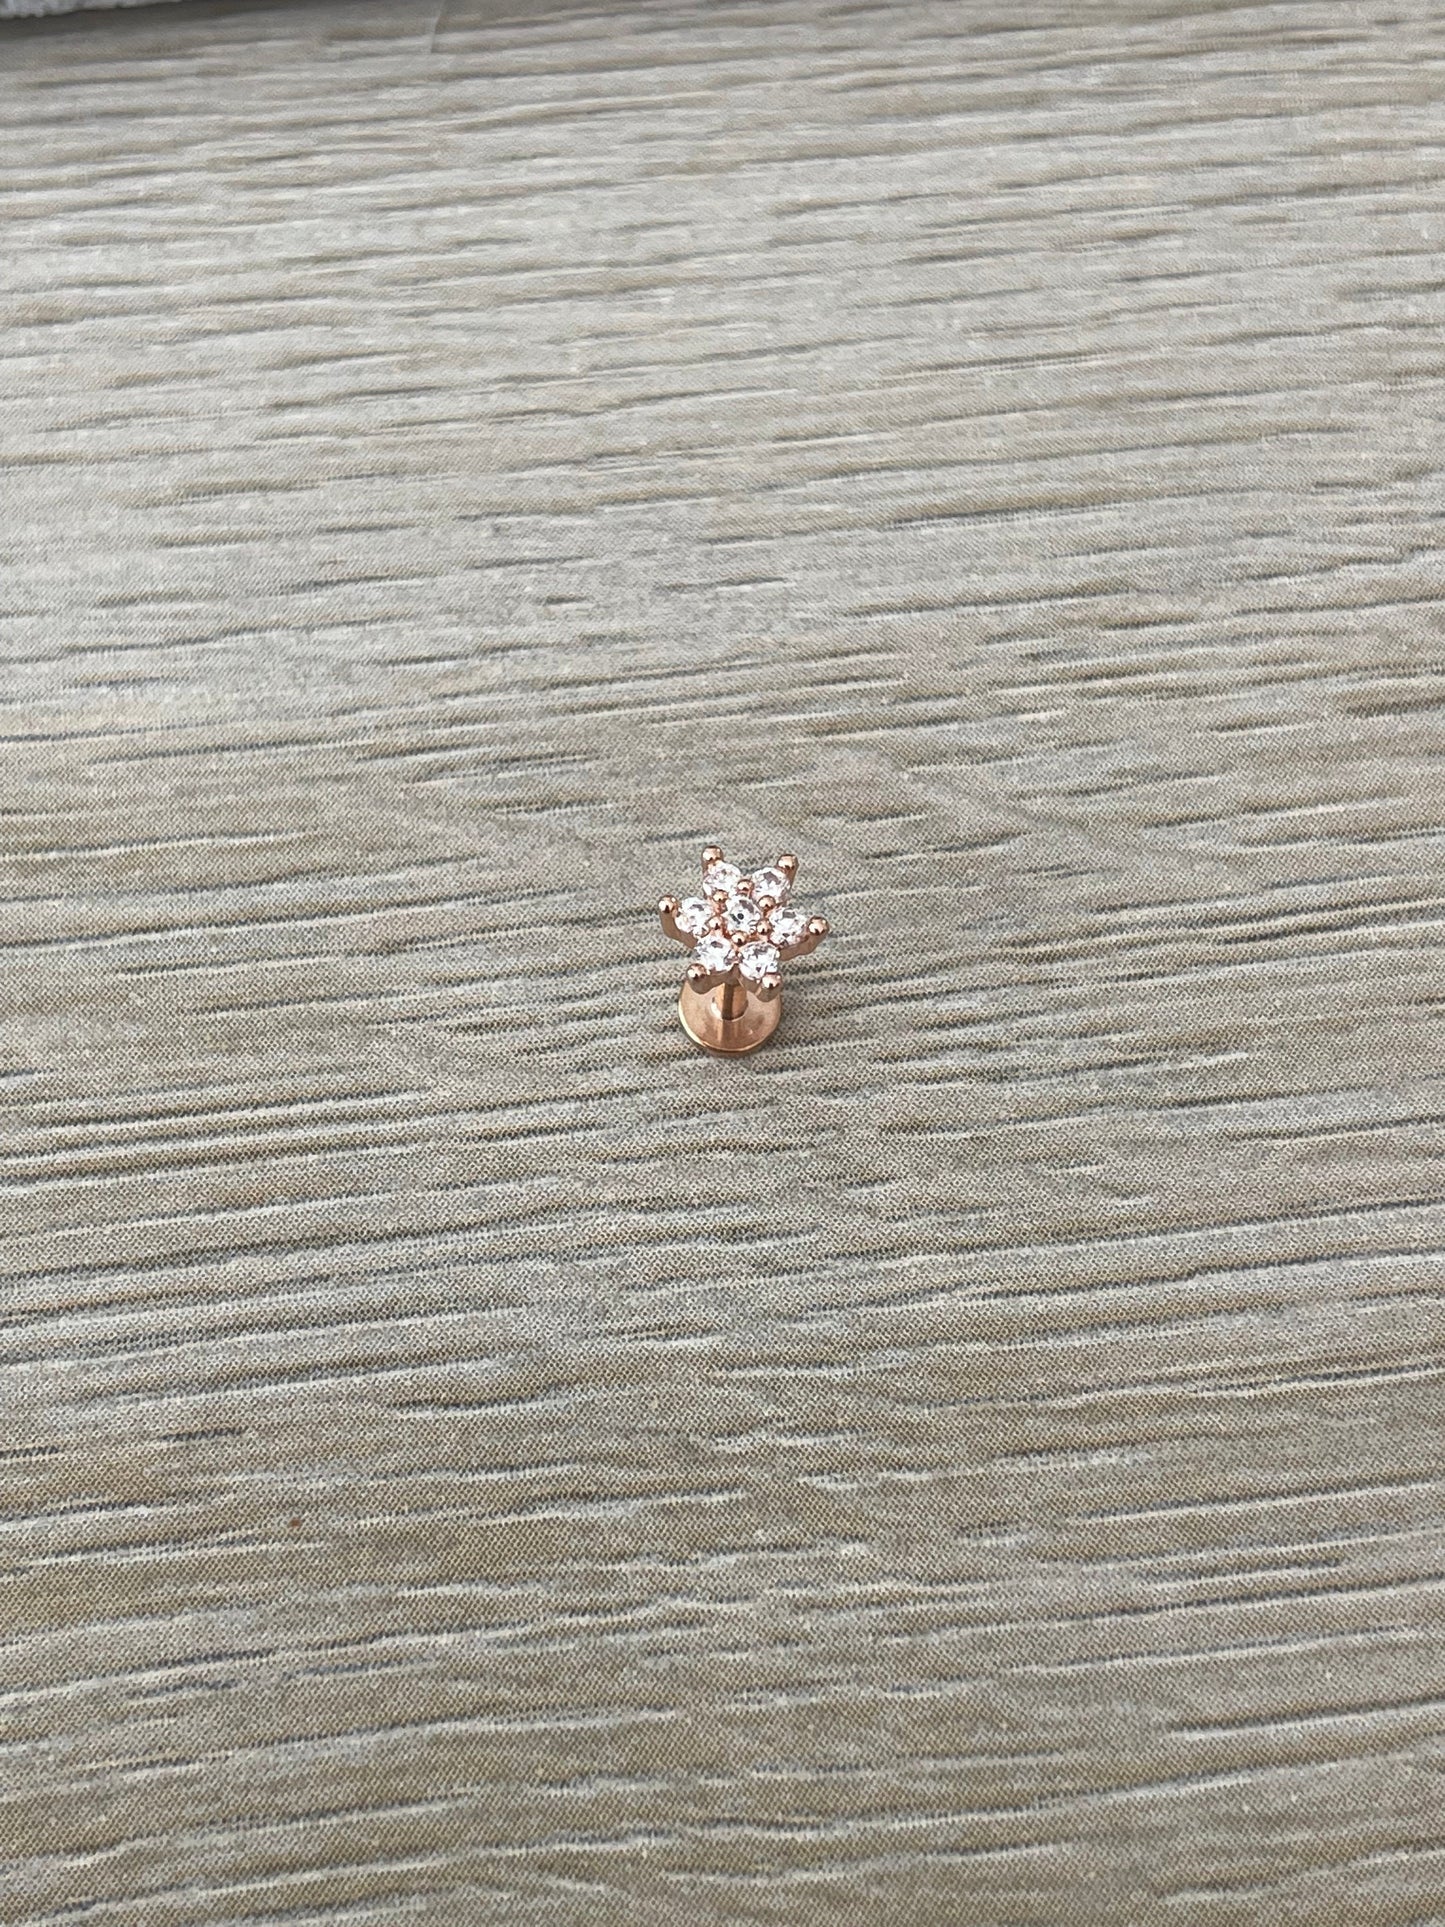 Rose Gold Flat Back Stud for Helix/Conch/Tragus etc (Surgical Steel - 16G, 6mm or 8mm)